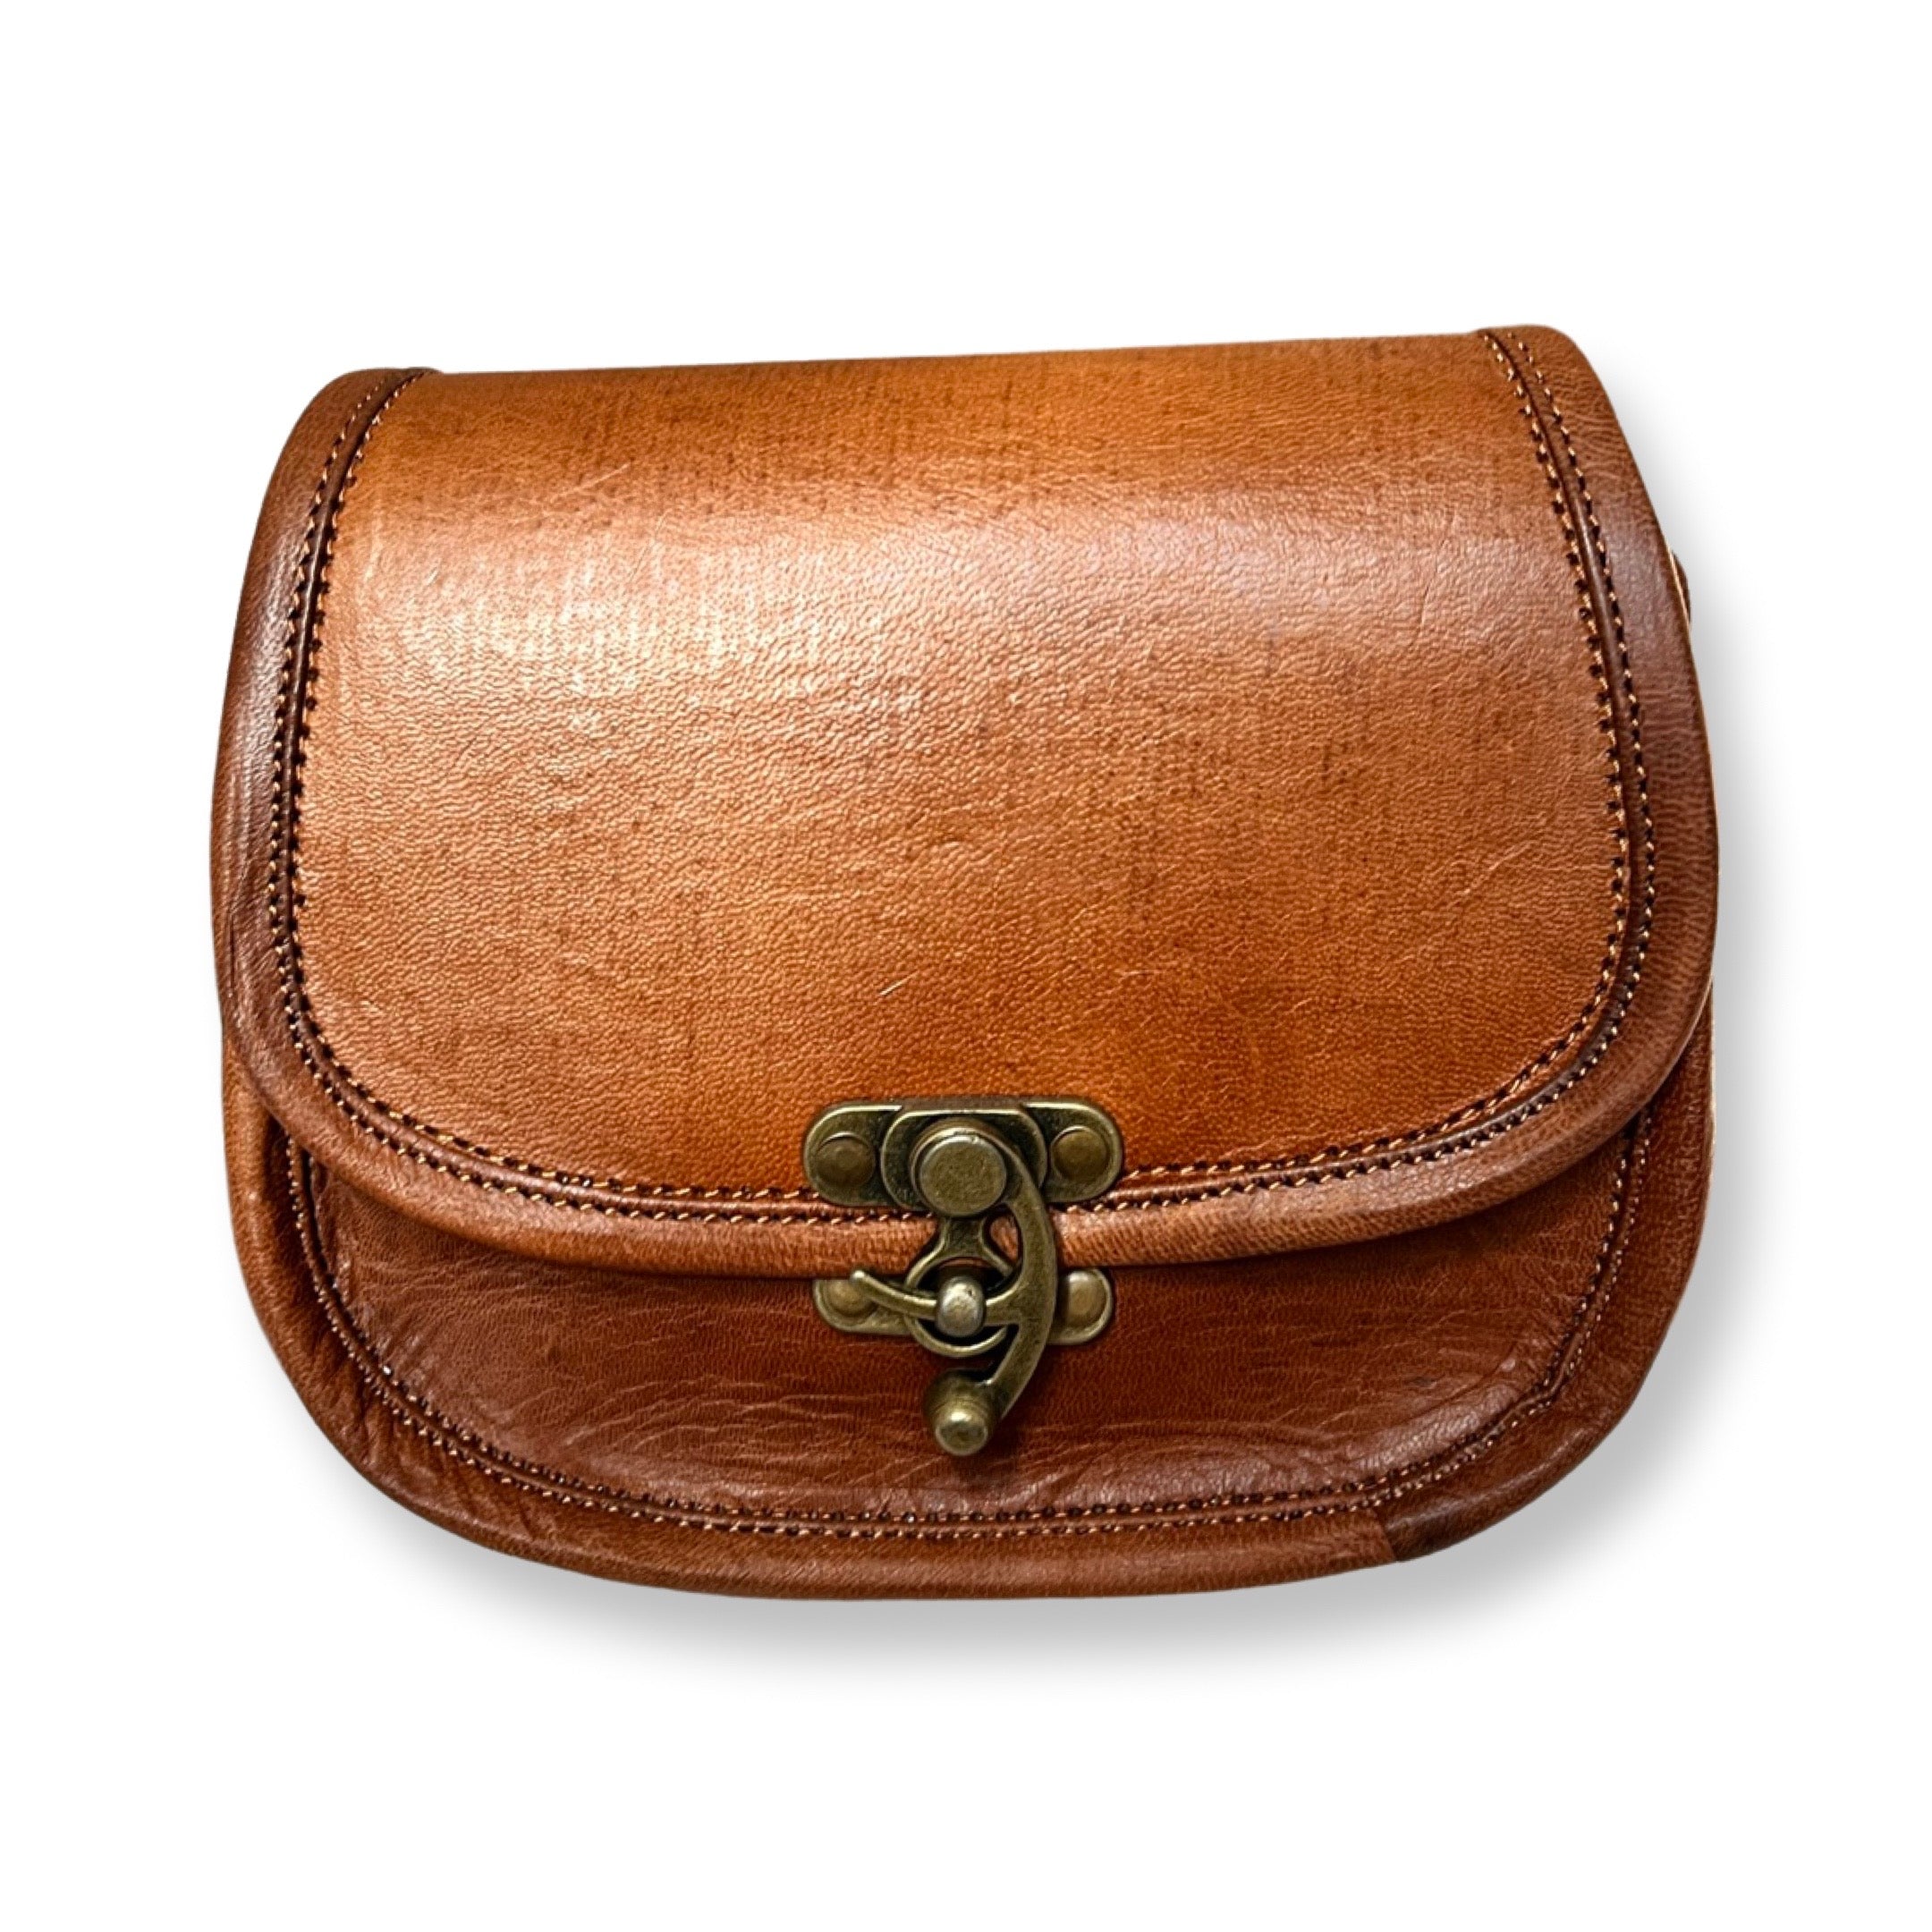 Original goat leather bags. - Picture of The British Bag, Chuo - Tripadvisor